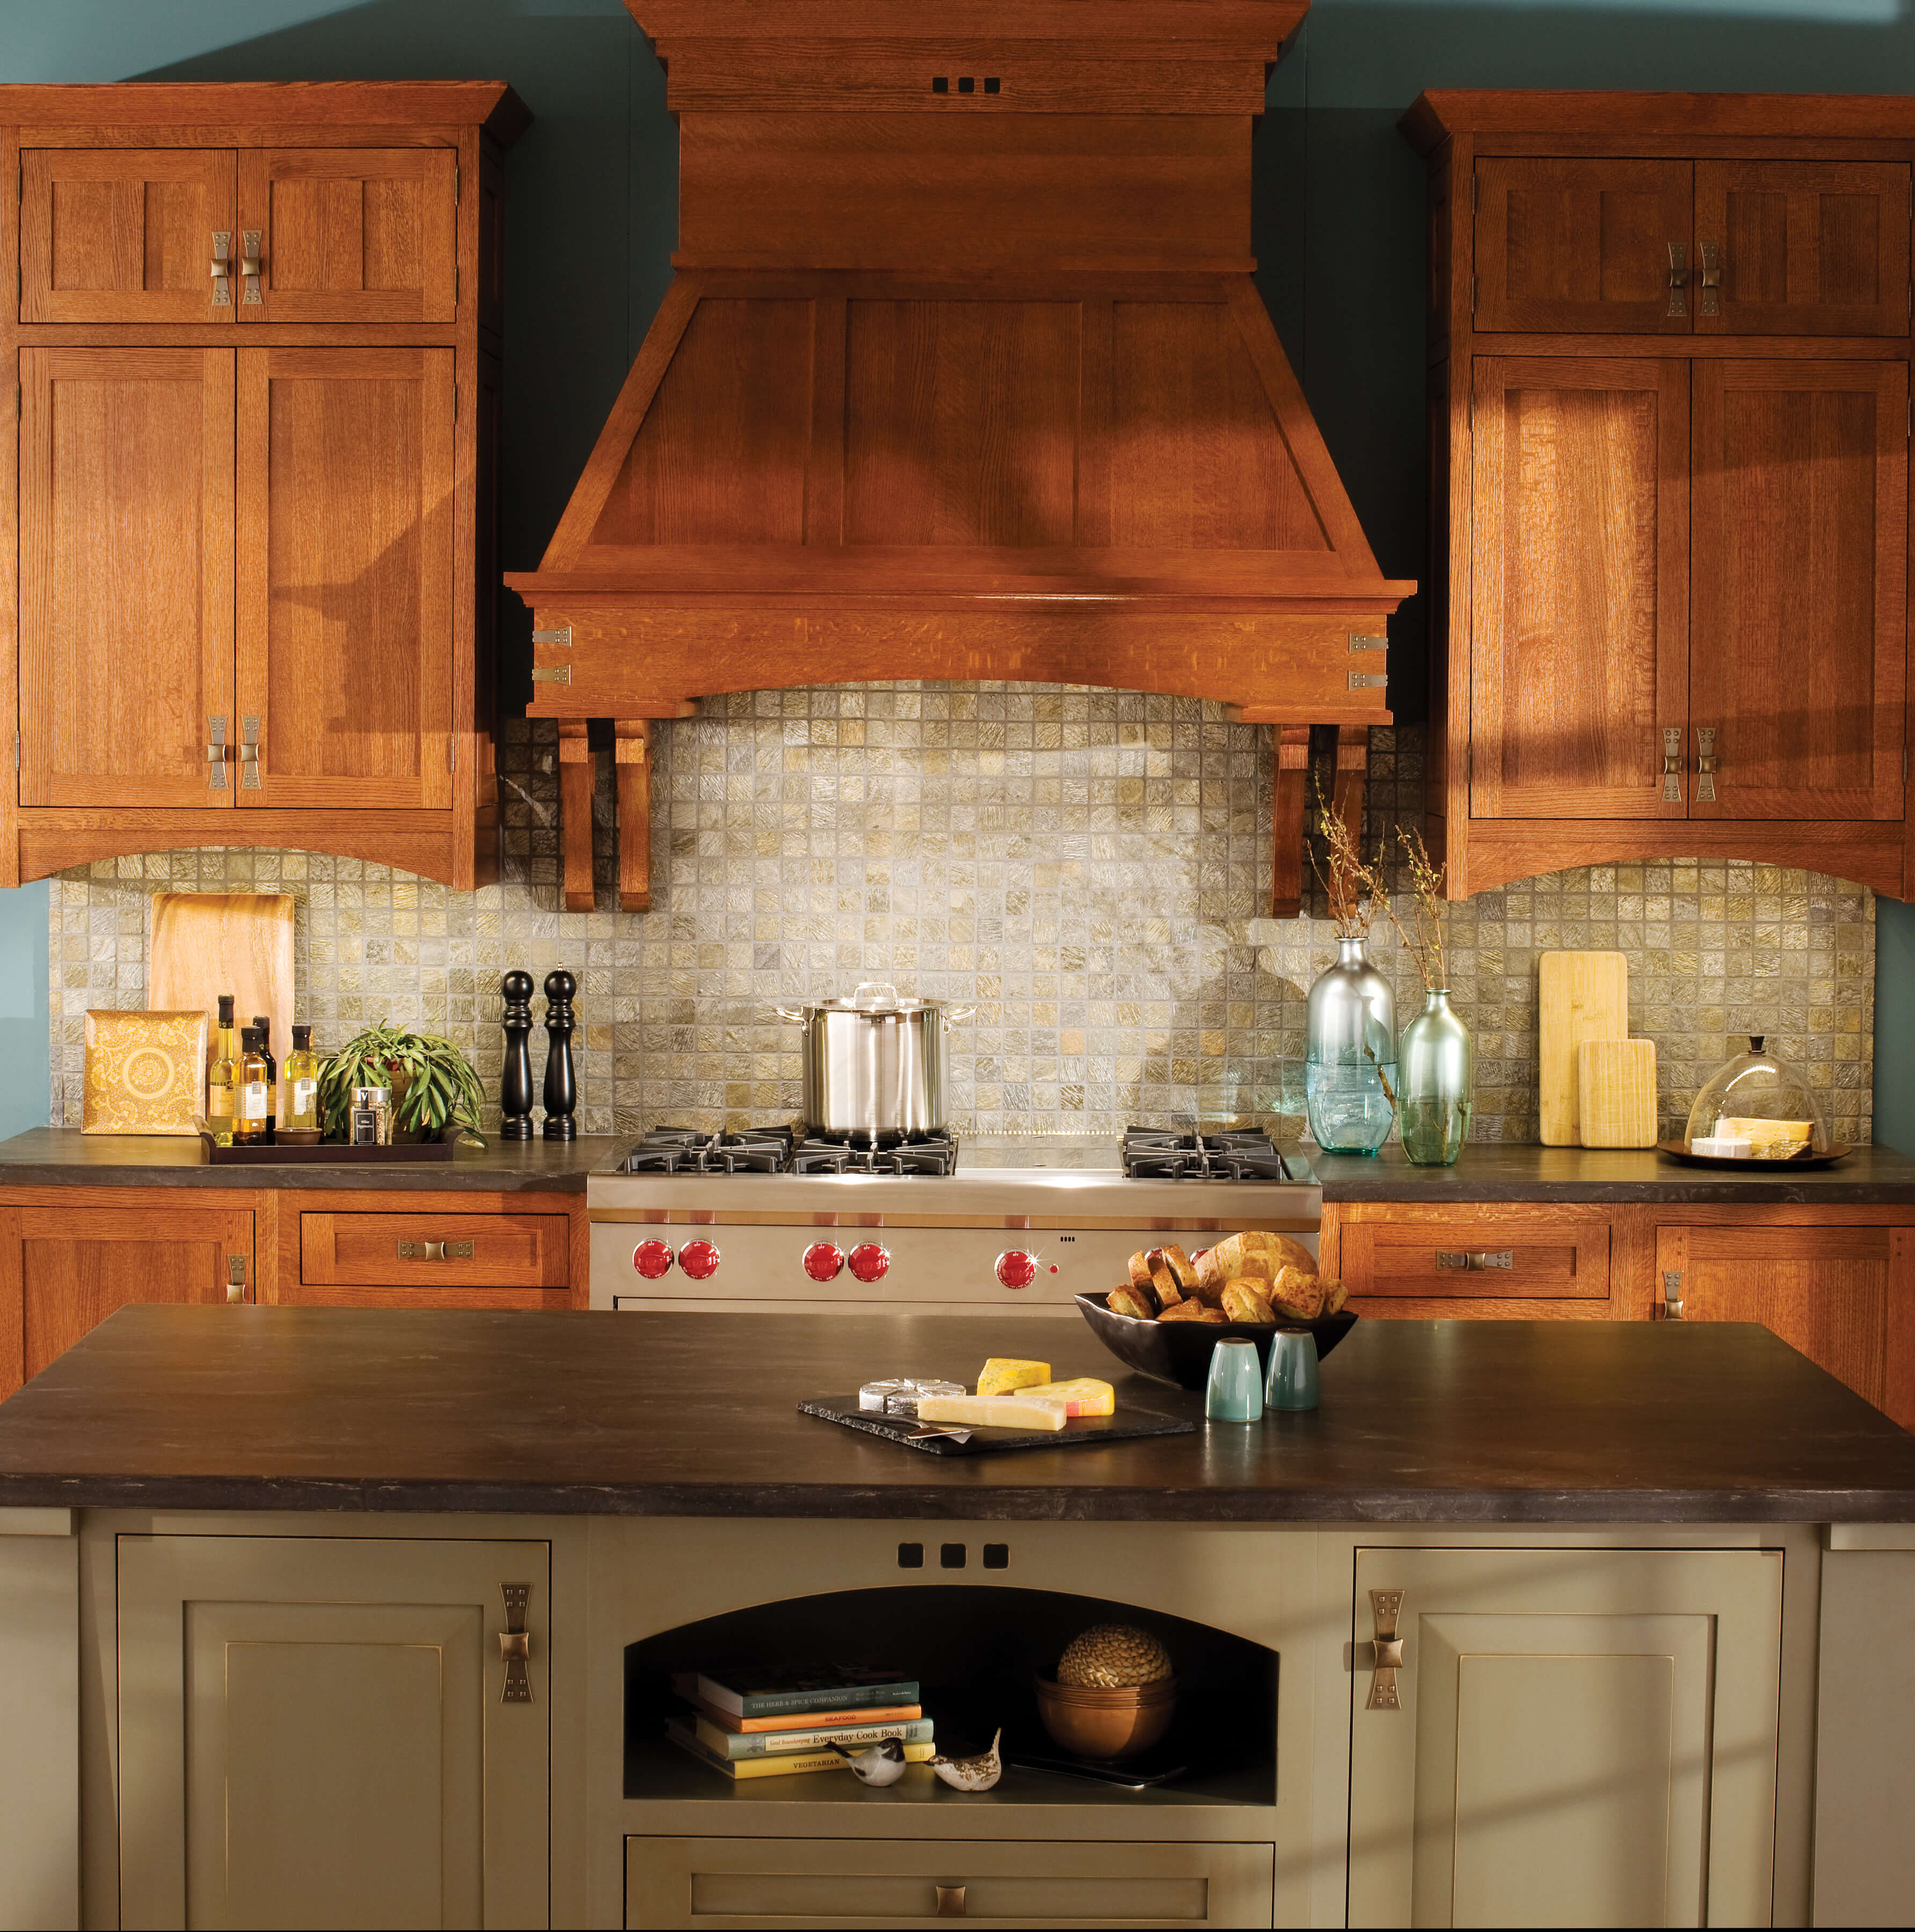 Dura Supreme Cabinetry shown with the Craftsma Panel-Inset door style with a 